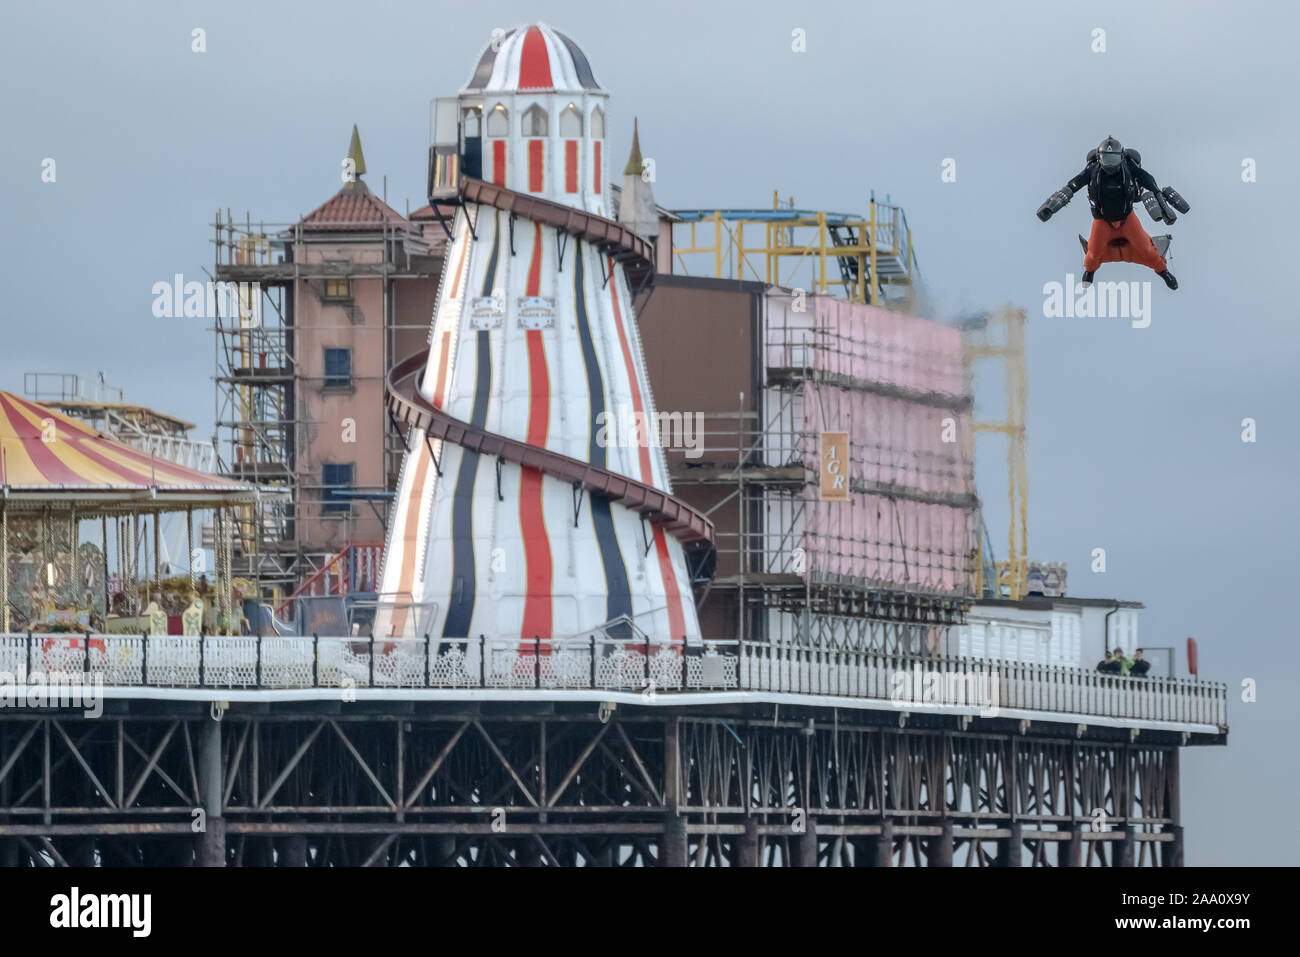 Richard Browning “Iron Man”, founder of Gravity Industries, makes a record-breaking flight in his body-controlled jet-powered suit over Brighton Pier. Stock Photo